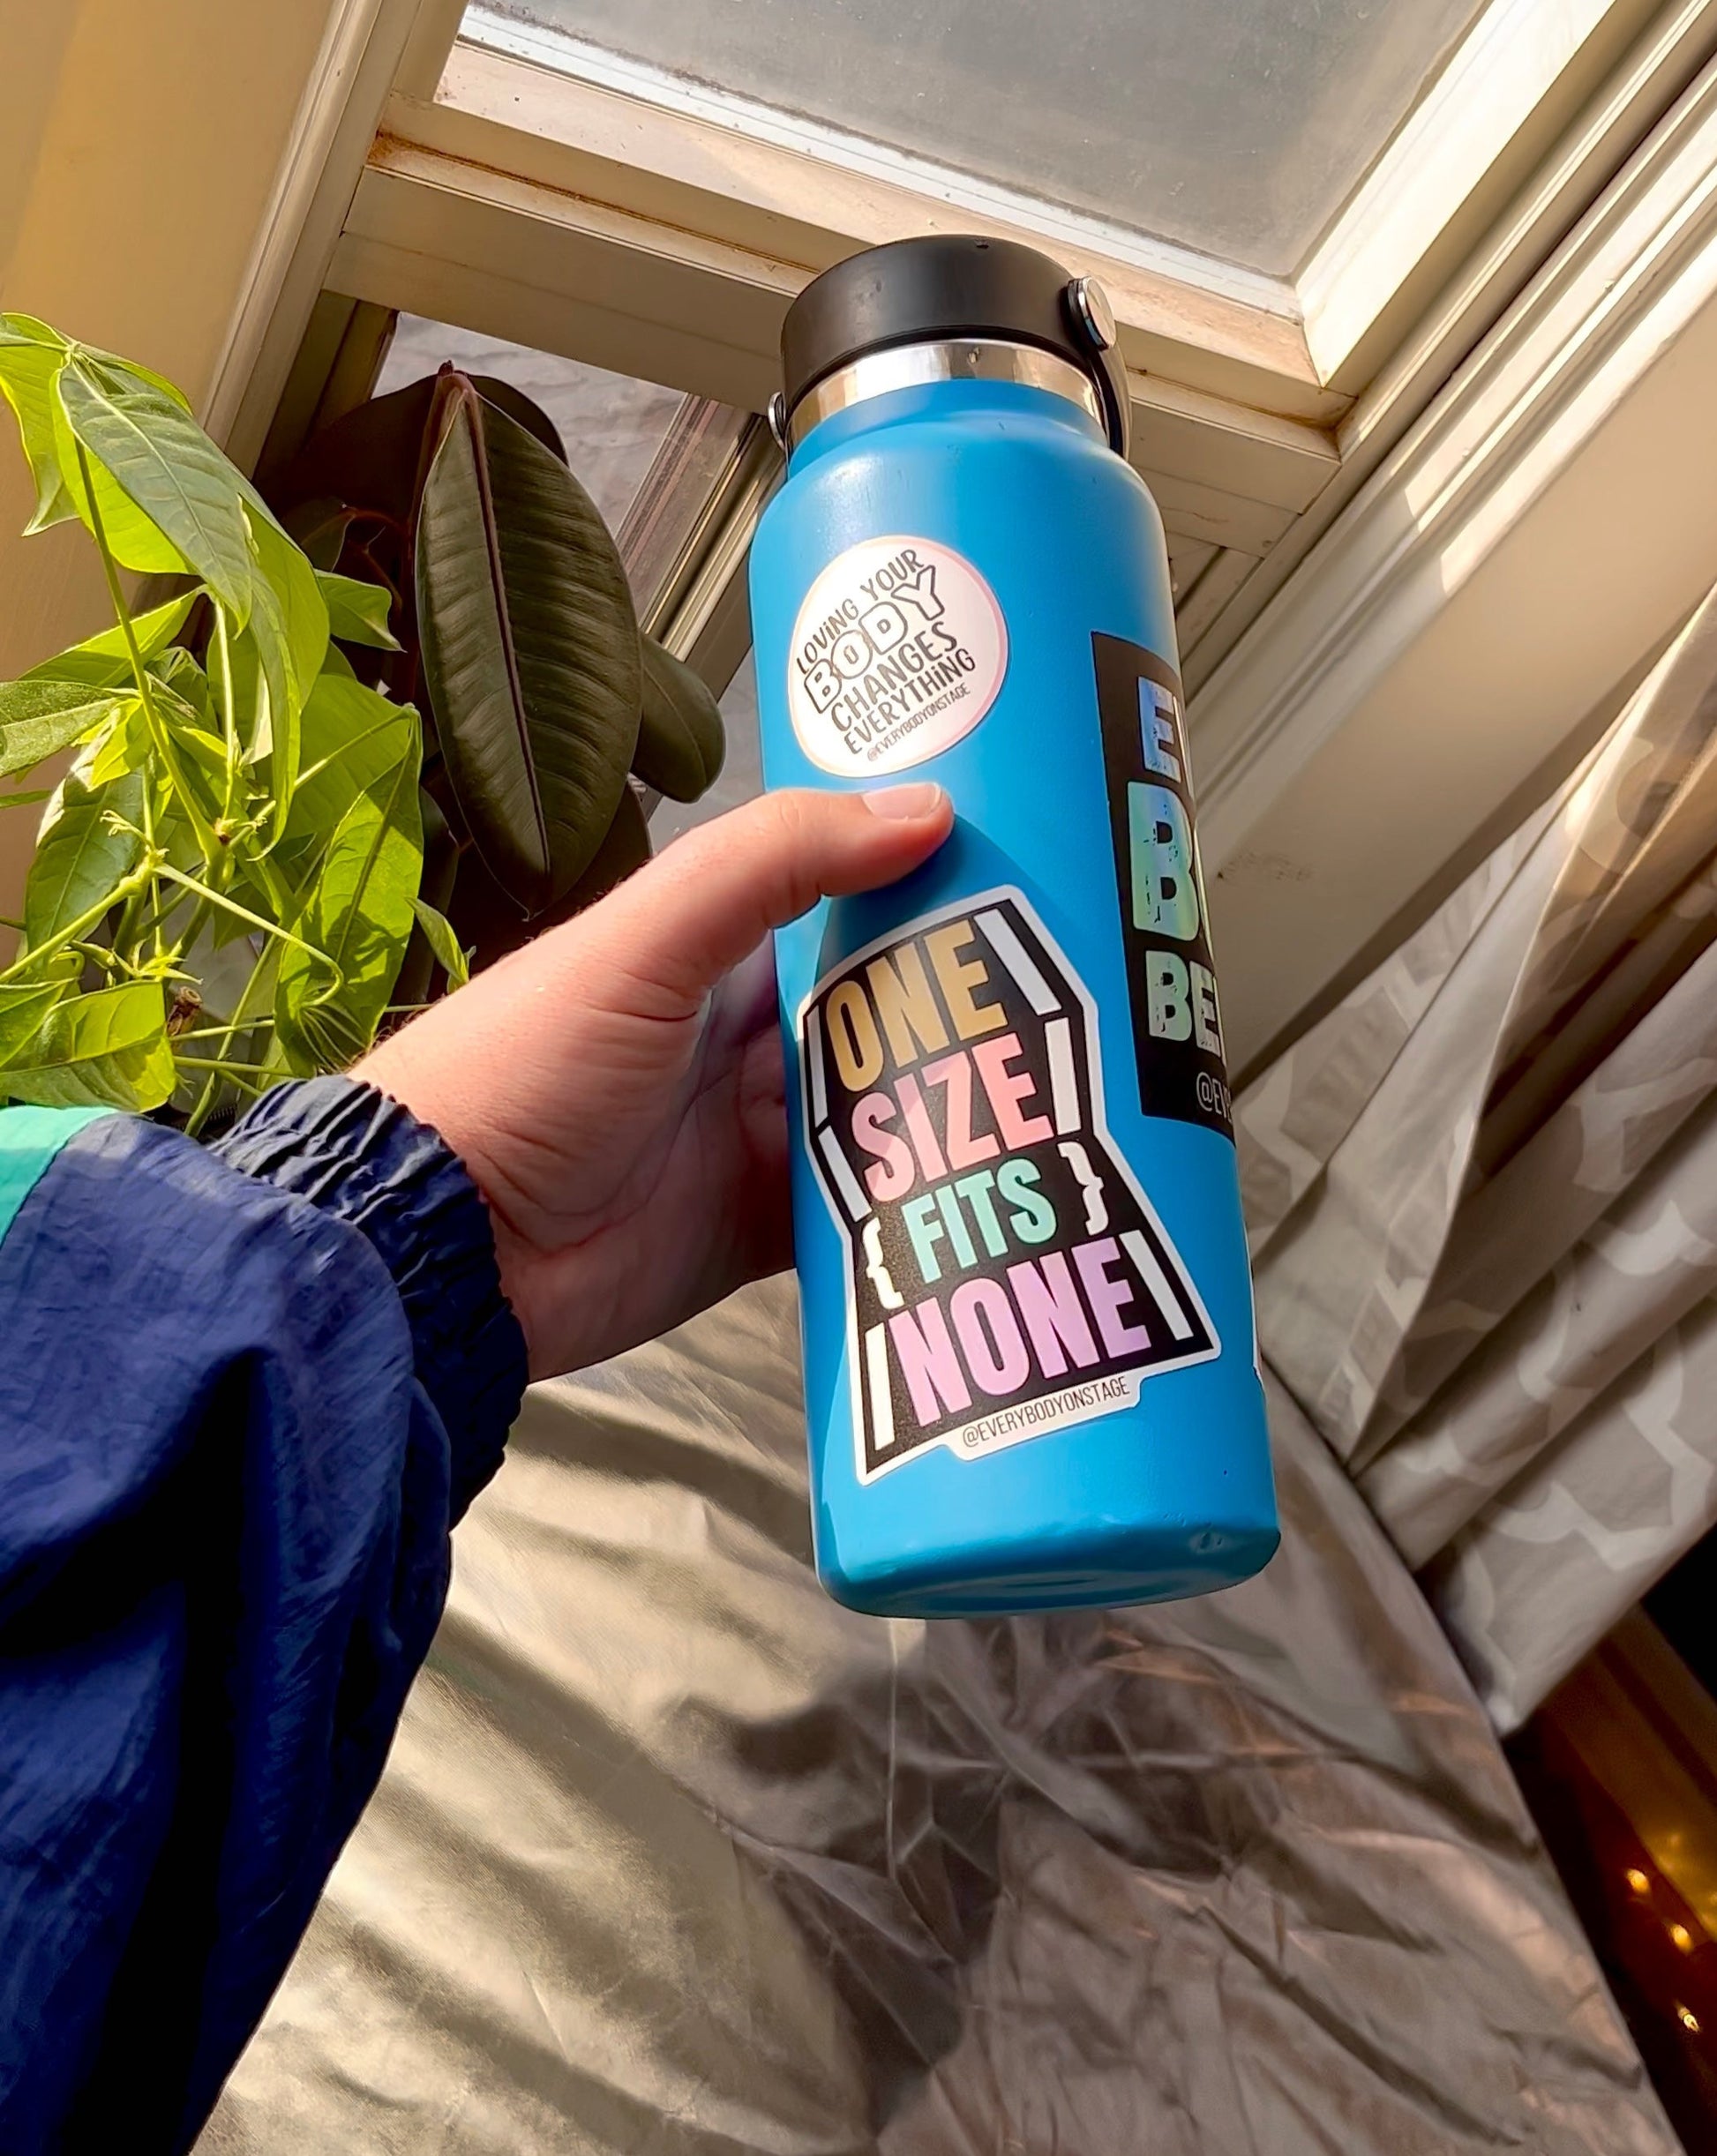 A Blue water bottle featuring the sticker collection